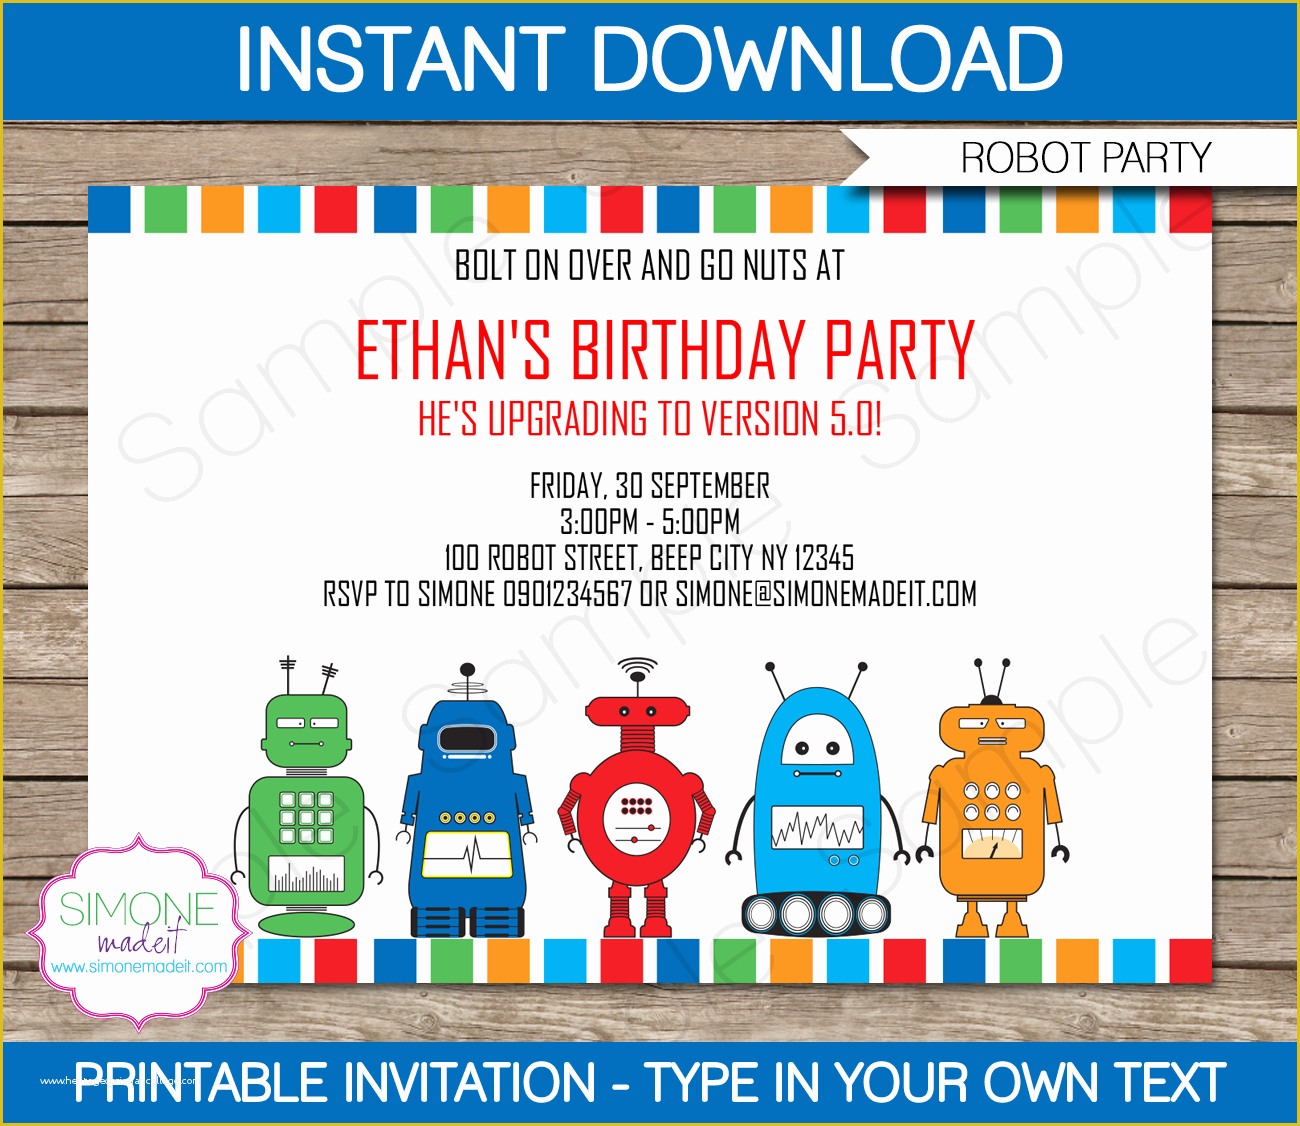 80's theme Party Invitation Templates Free Of Robot Party Invitations Template